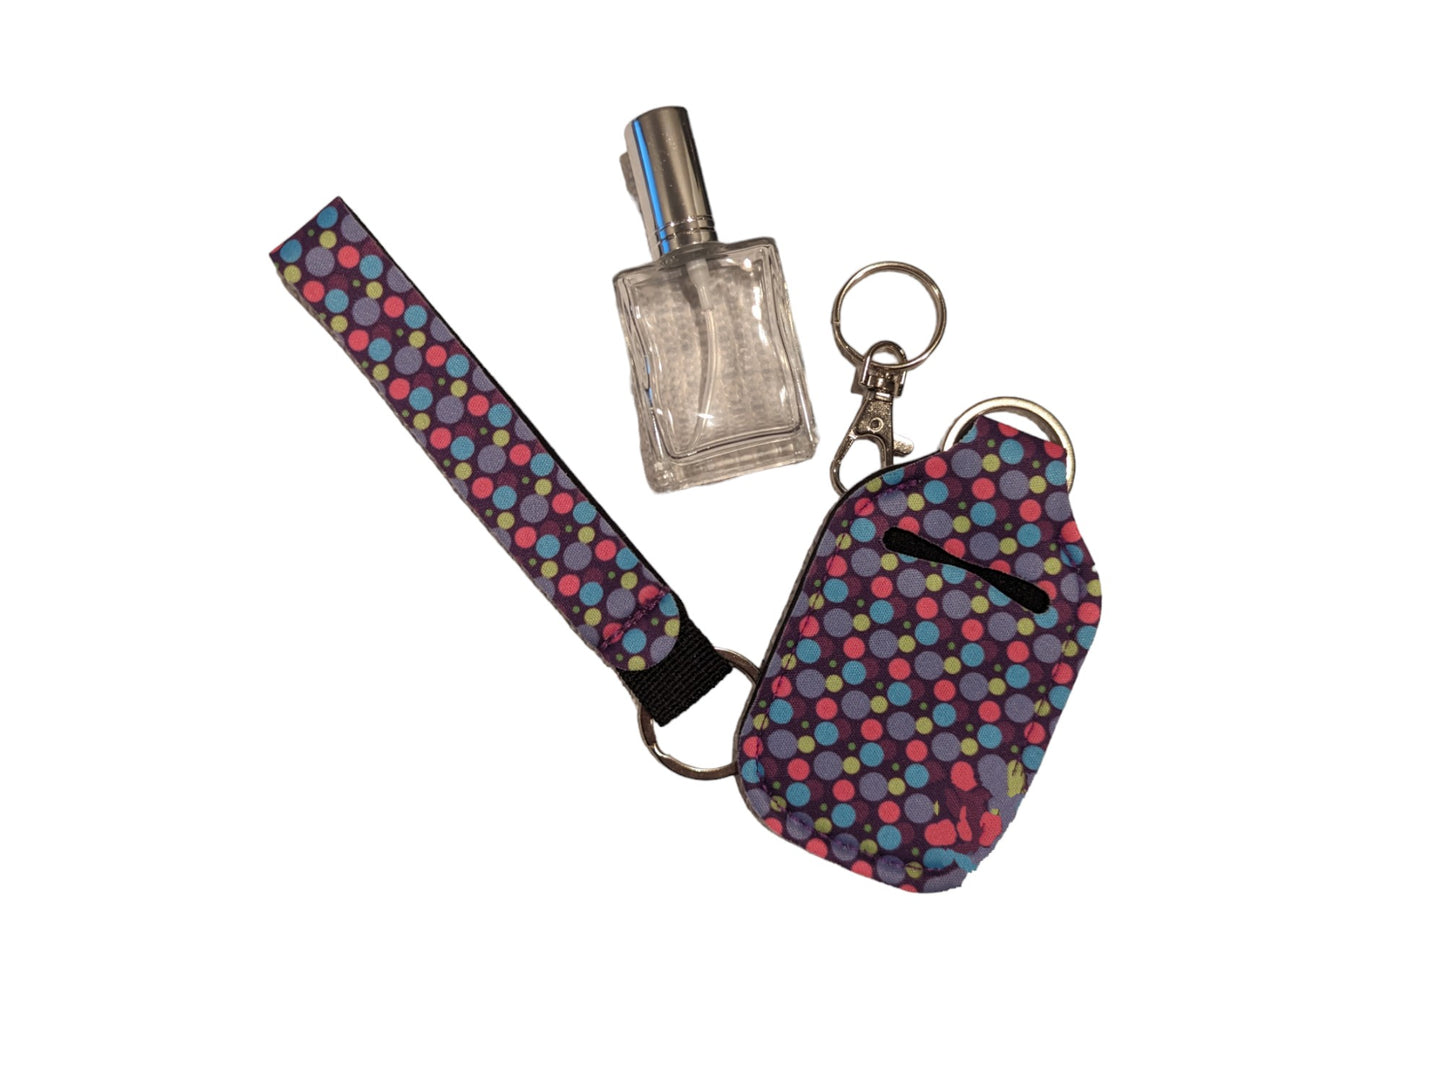 Chic Key Chain with extra matching Key Chain